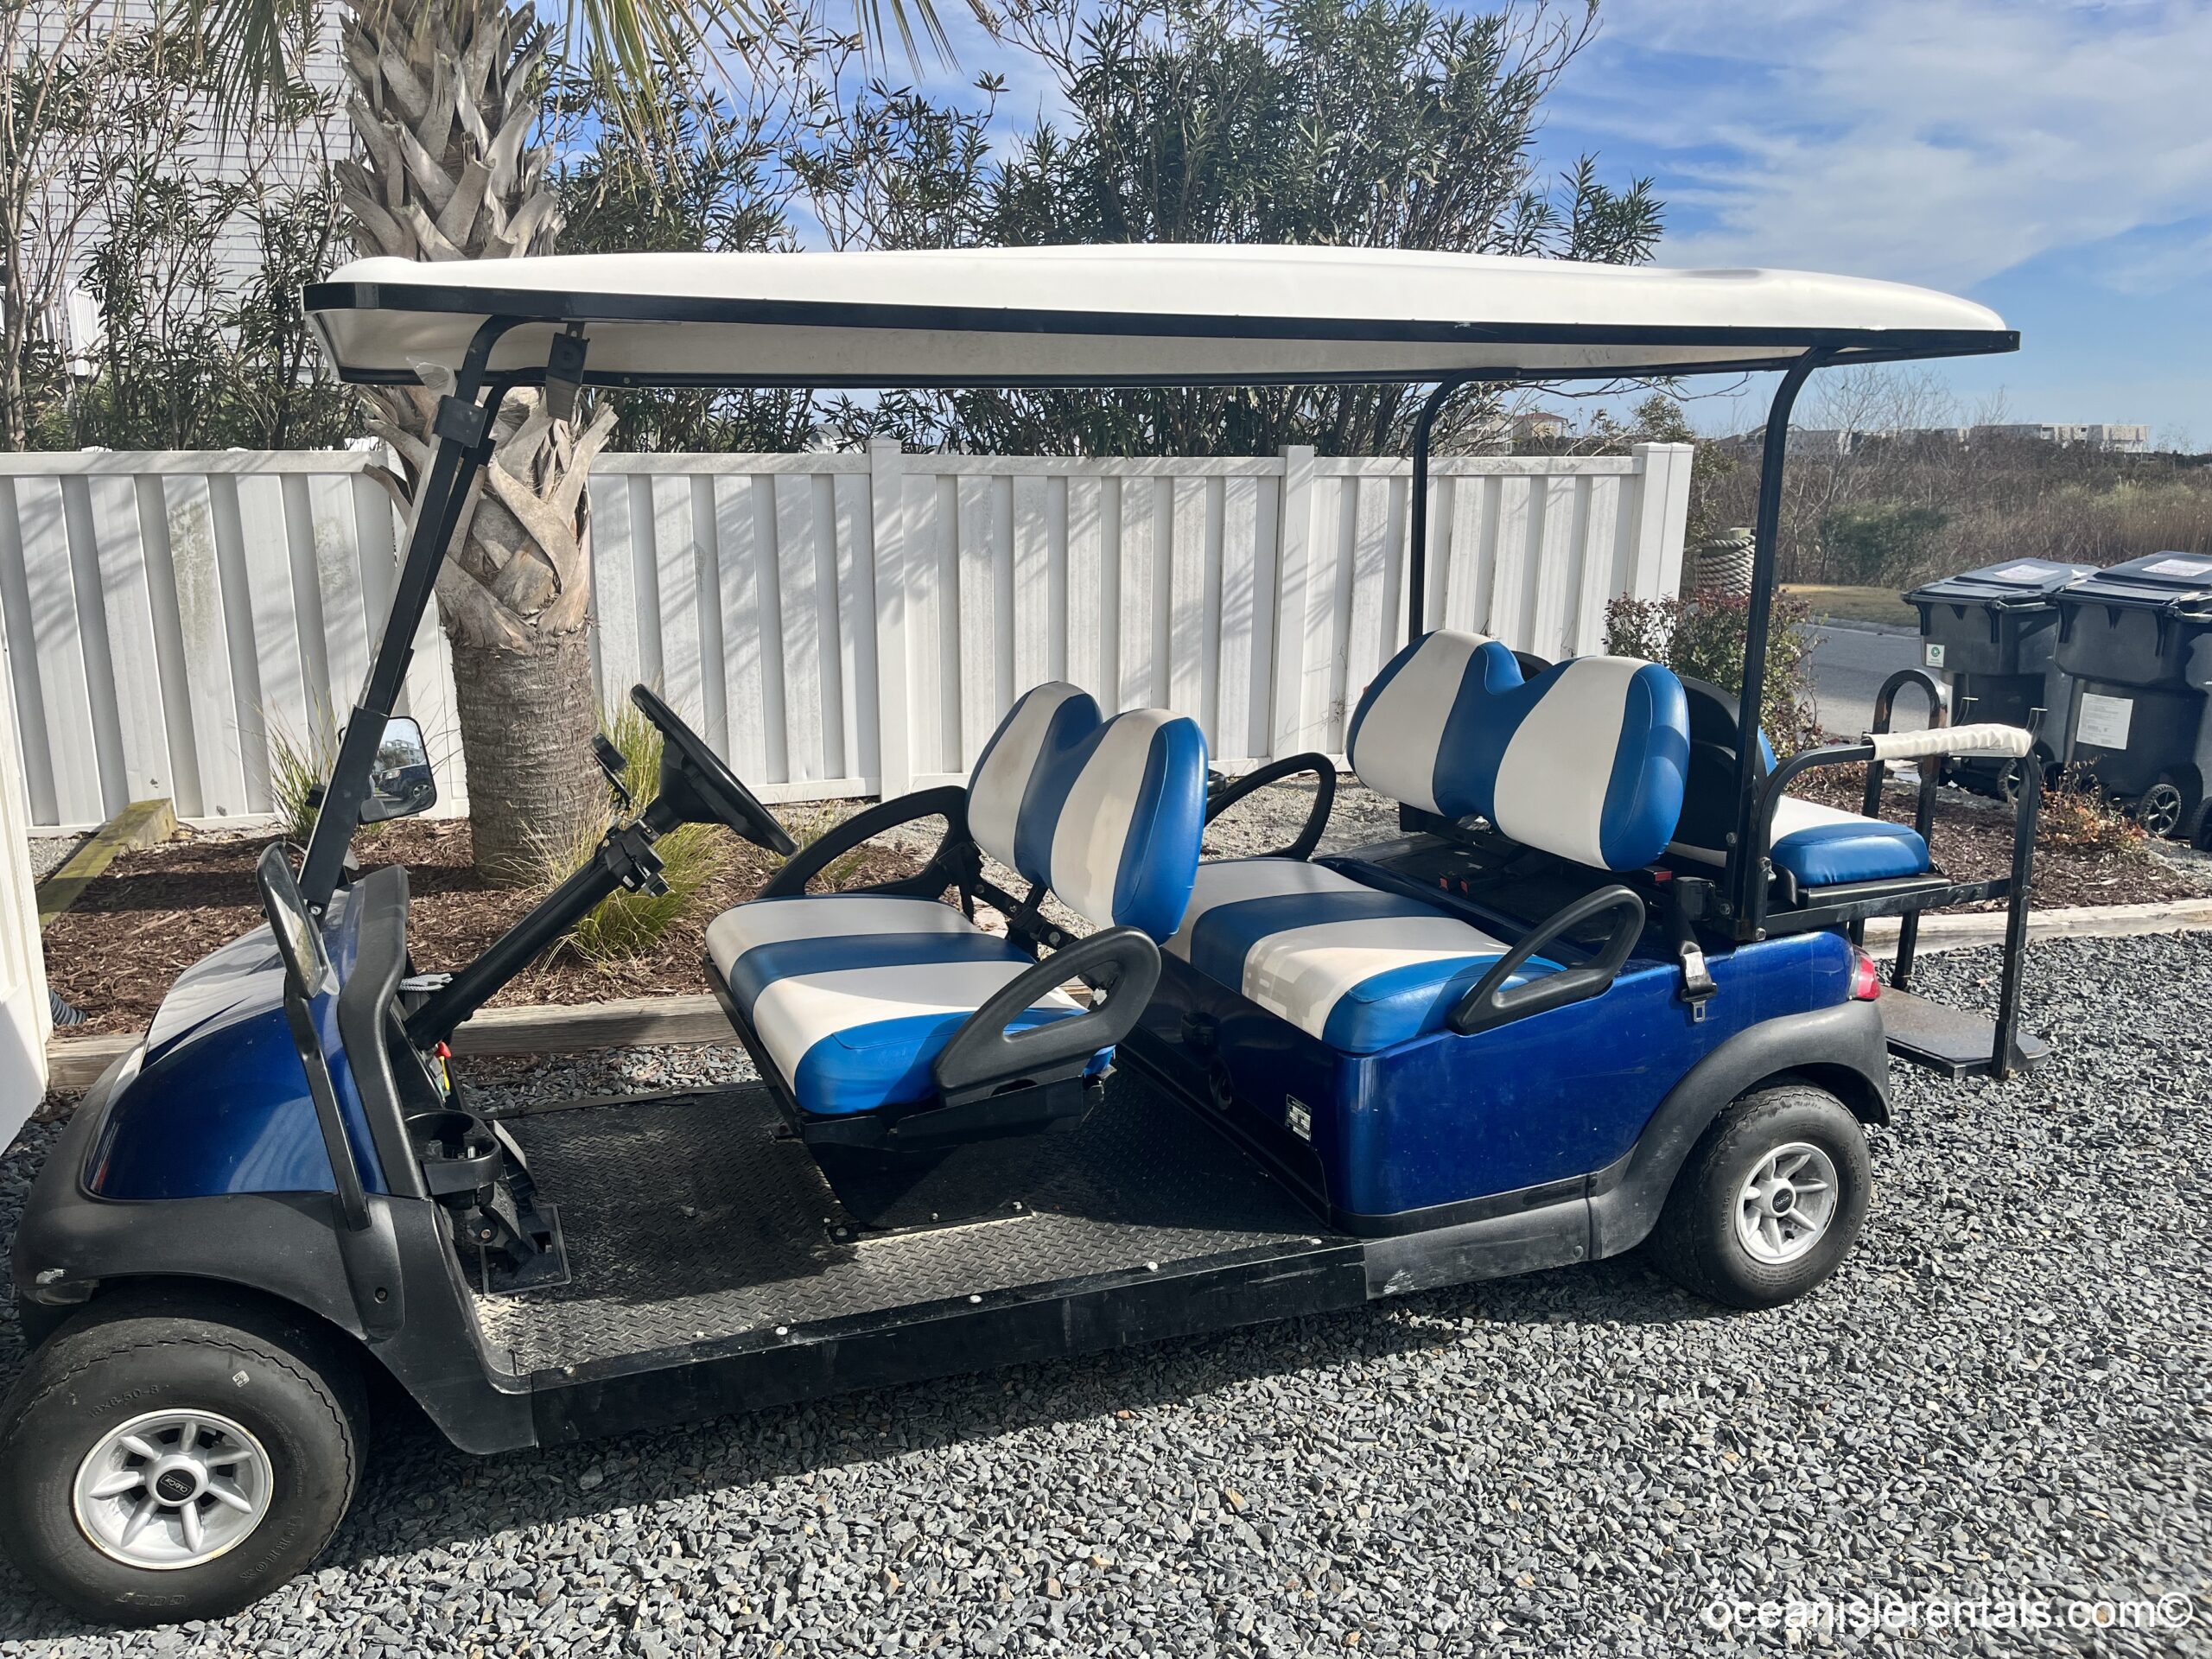 Limo golf cart, 123 Via Soundside, Any Port in a Storm